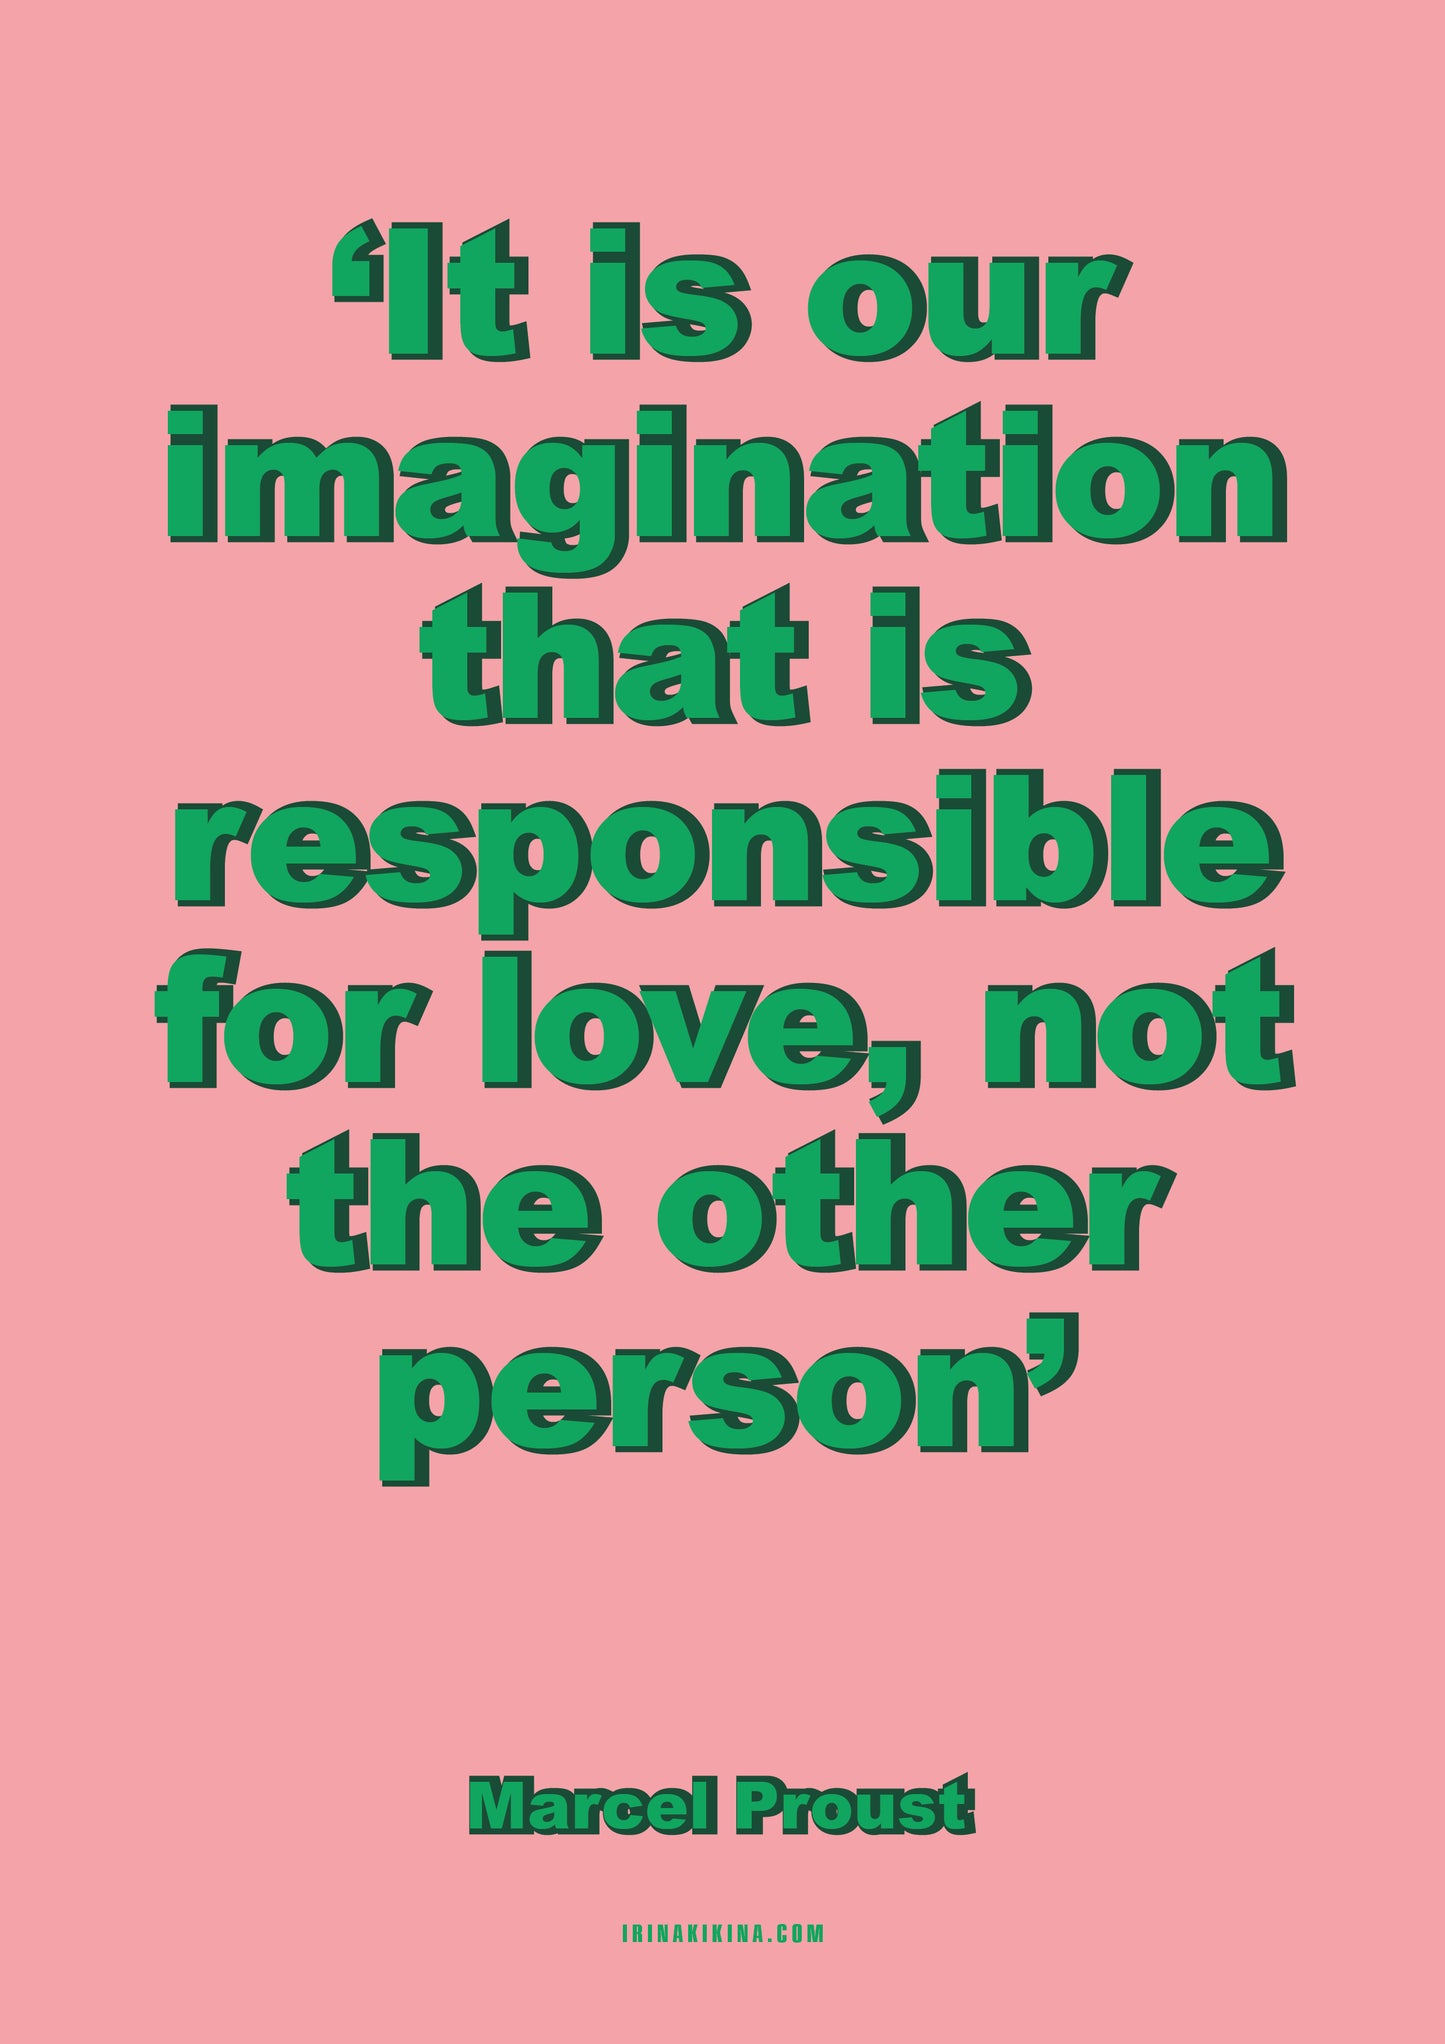 Our Imagination that is Responsible For Love. Marcel Proust Quote Artwork. A4 Poster.